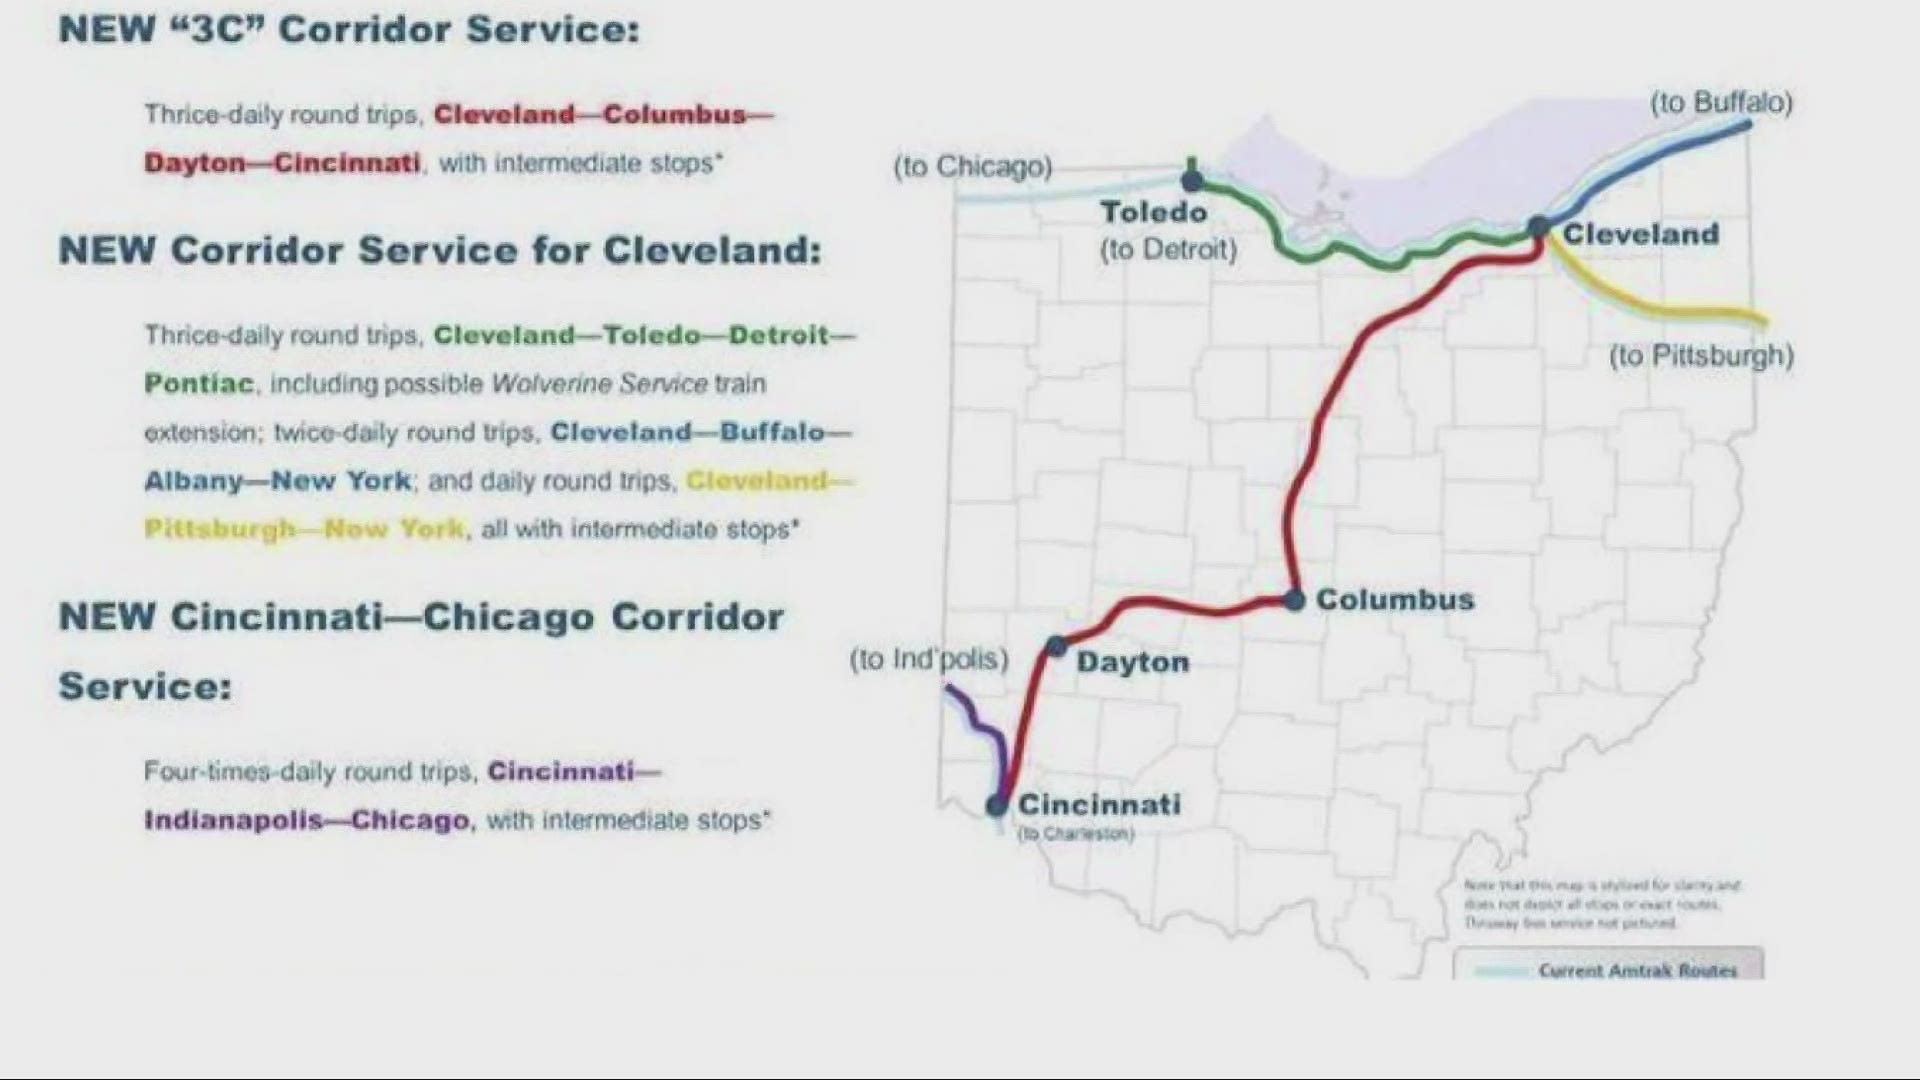 Amtrak is looking to add service from Cleveland to Cincinnati via Columbus and Dayton as part of its vision for the future.